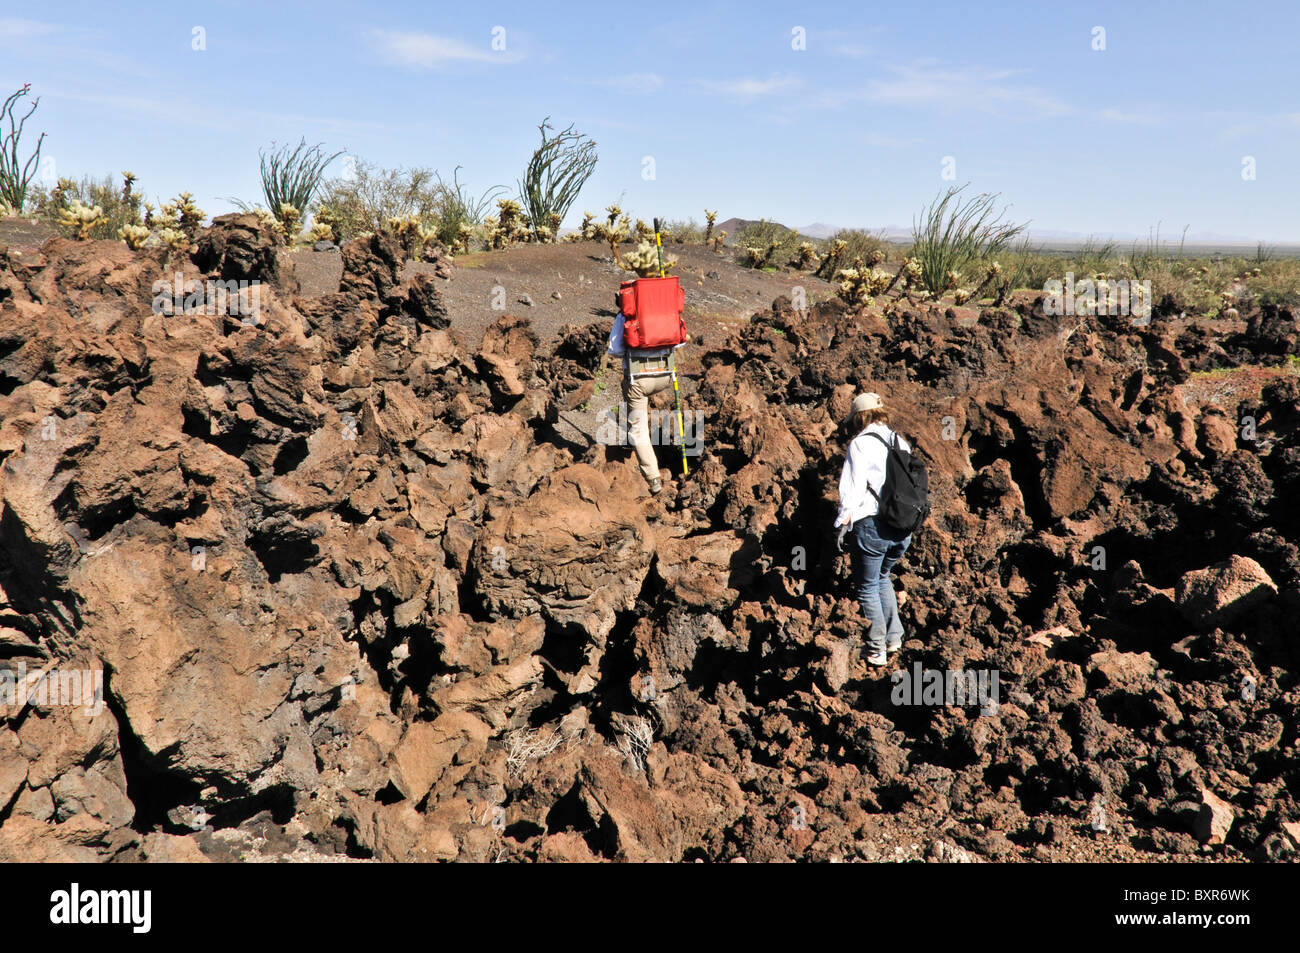 Hikers traversing rugged lava flow on side of Tecolote cinder cone, El Pinacate Biosphere Reserve, Sonora, Mexico Stock Photo